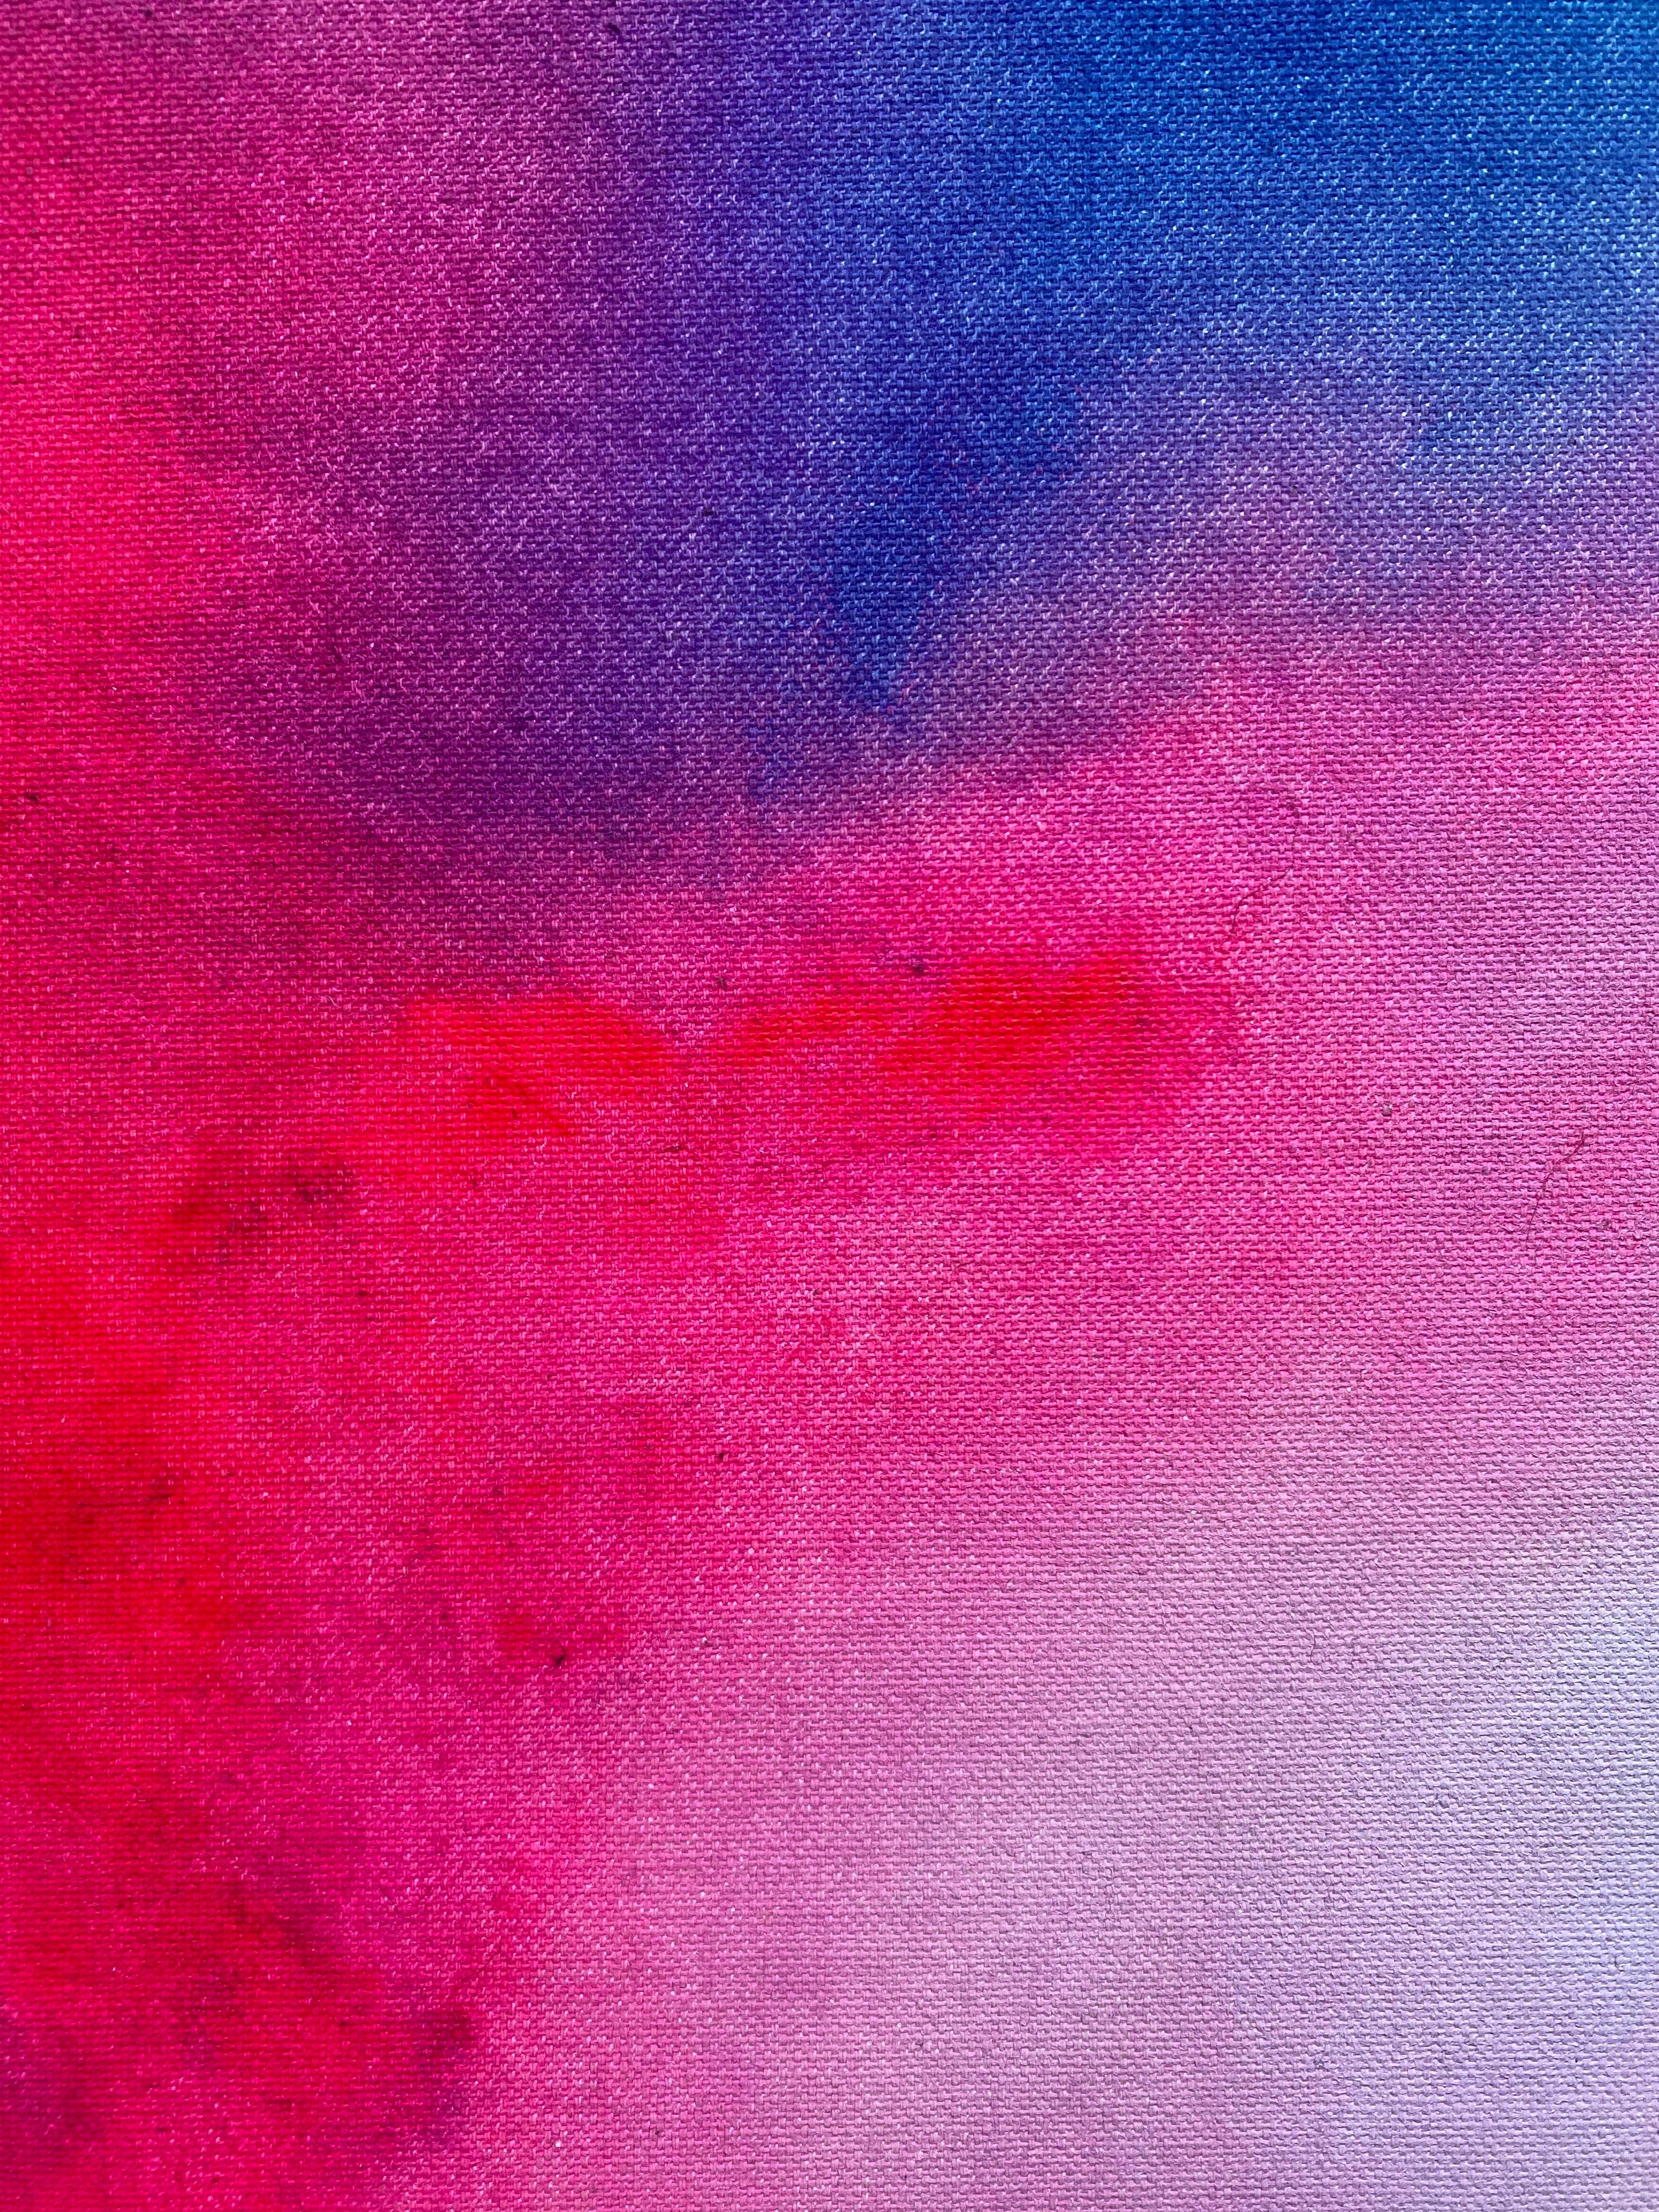 Gentle Blends Blue & Pink no2 small abstract on canvas framed in white mat board For Sale 1